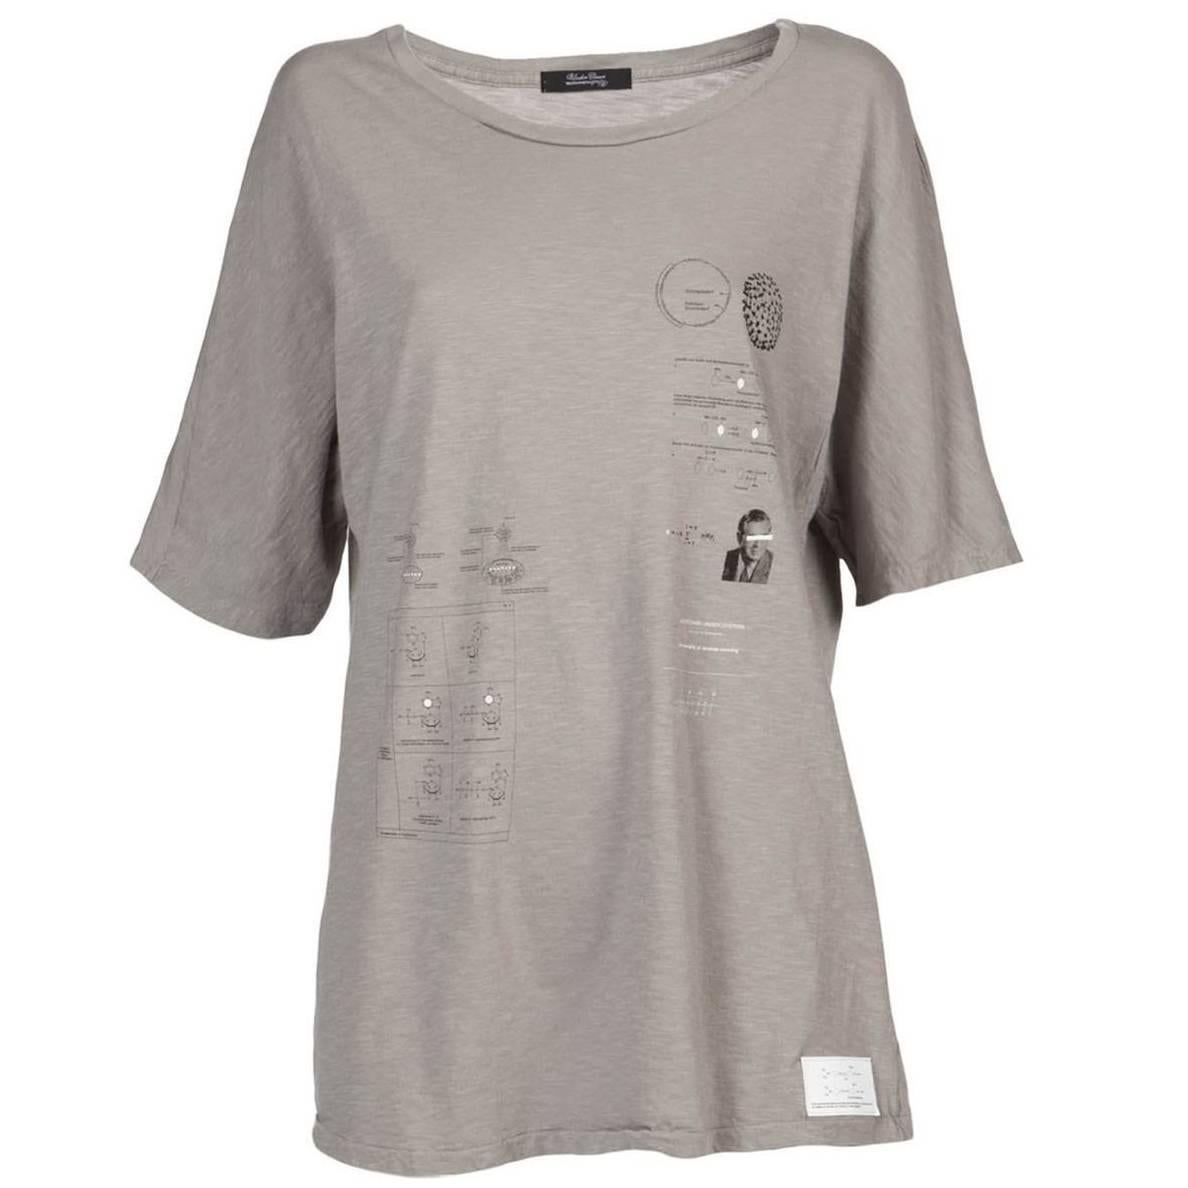 Undercover A/W 2010 Oversize Fit Graphic Print T-Shirt For Sale